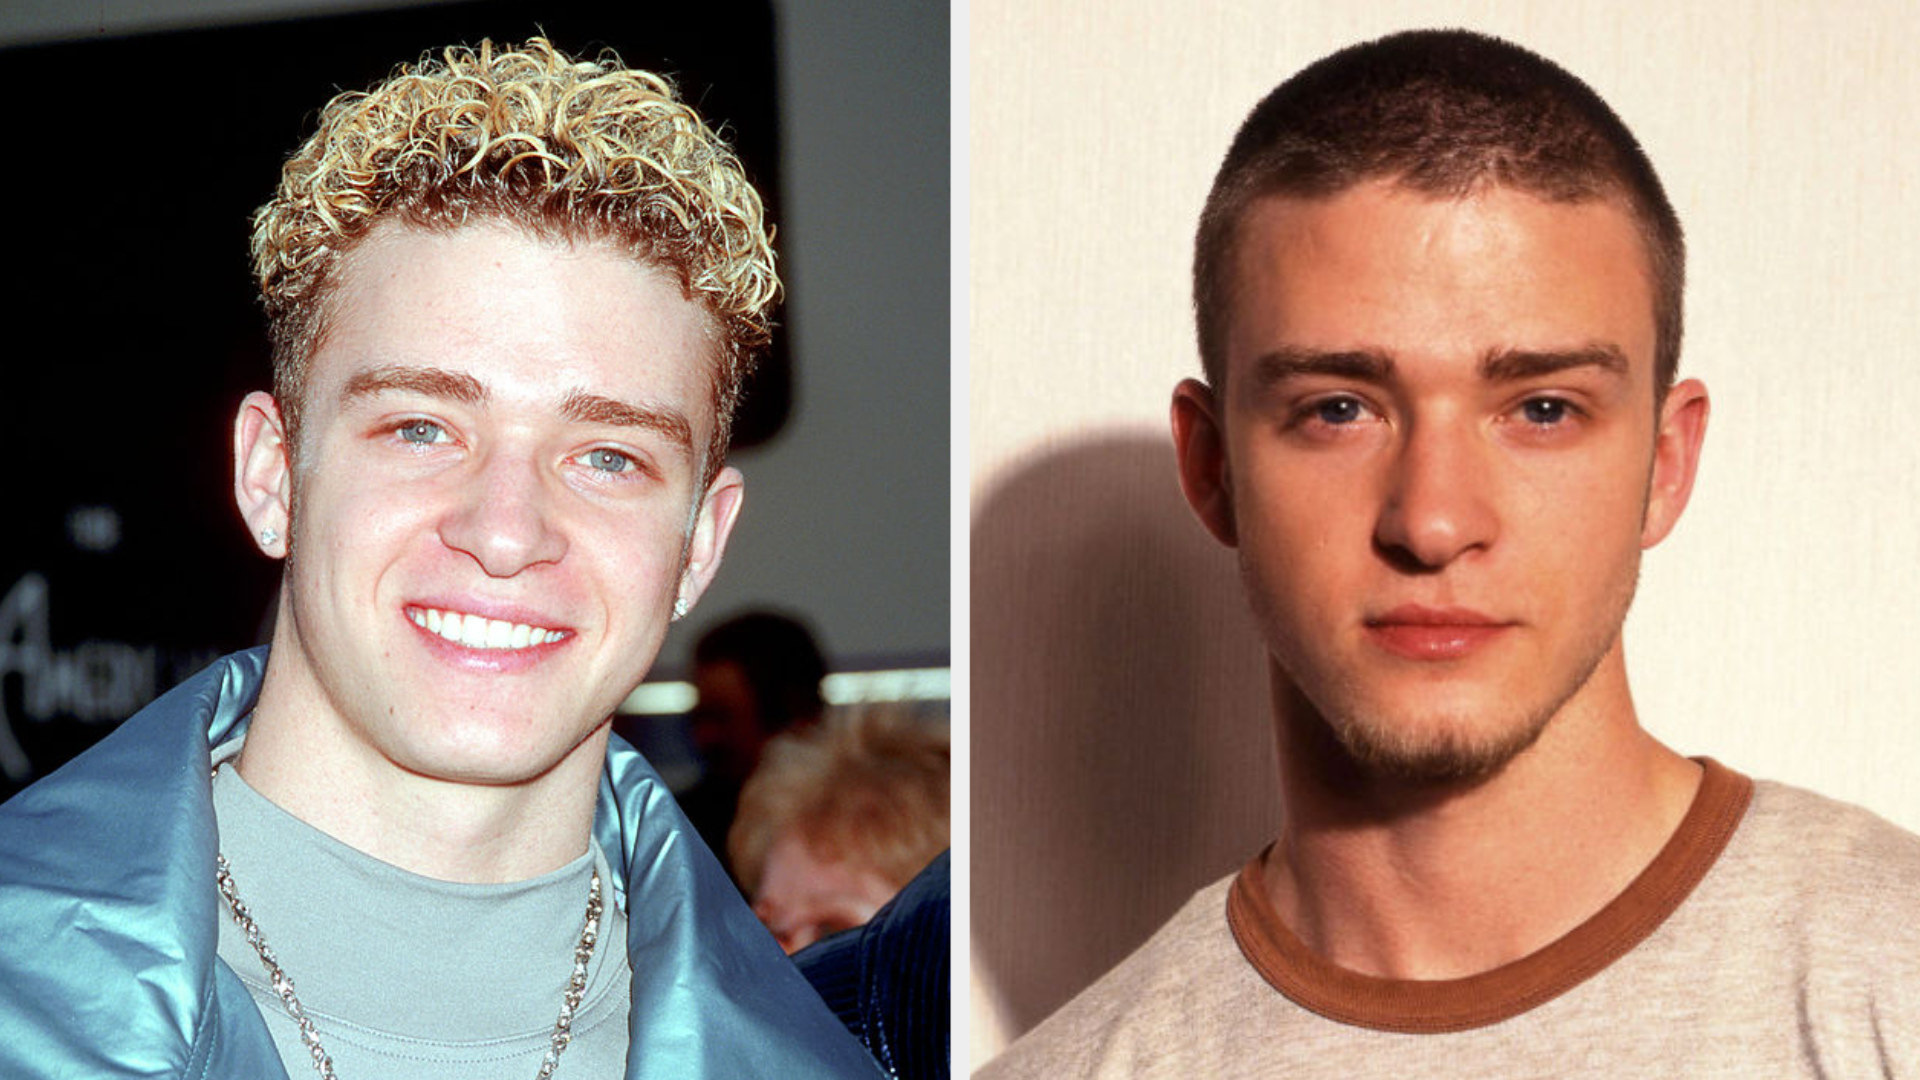 Justin Timberlake with curly, blonde hair and Justin with a buzz cut